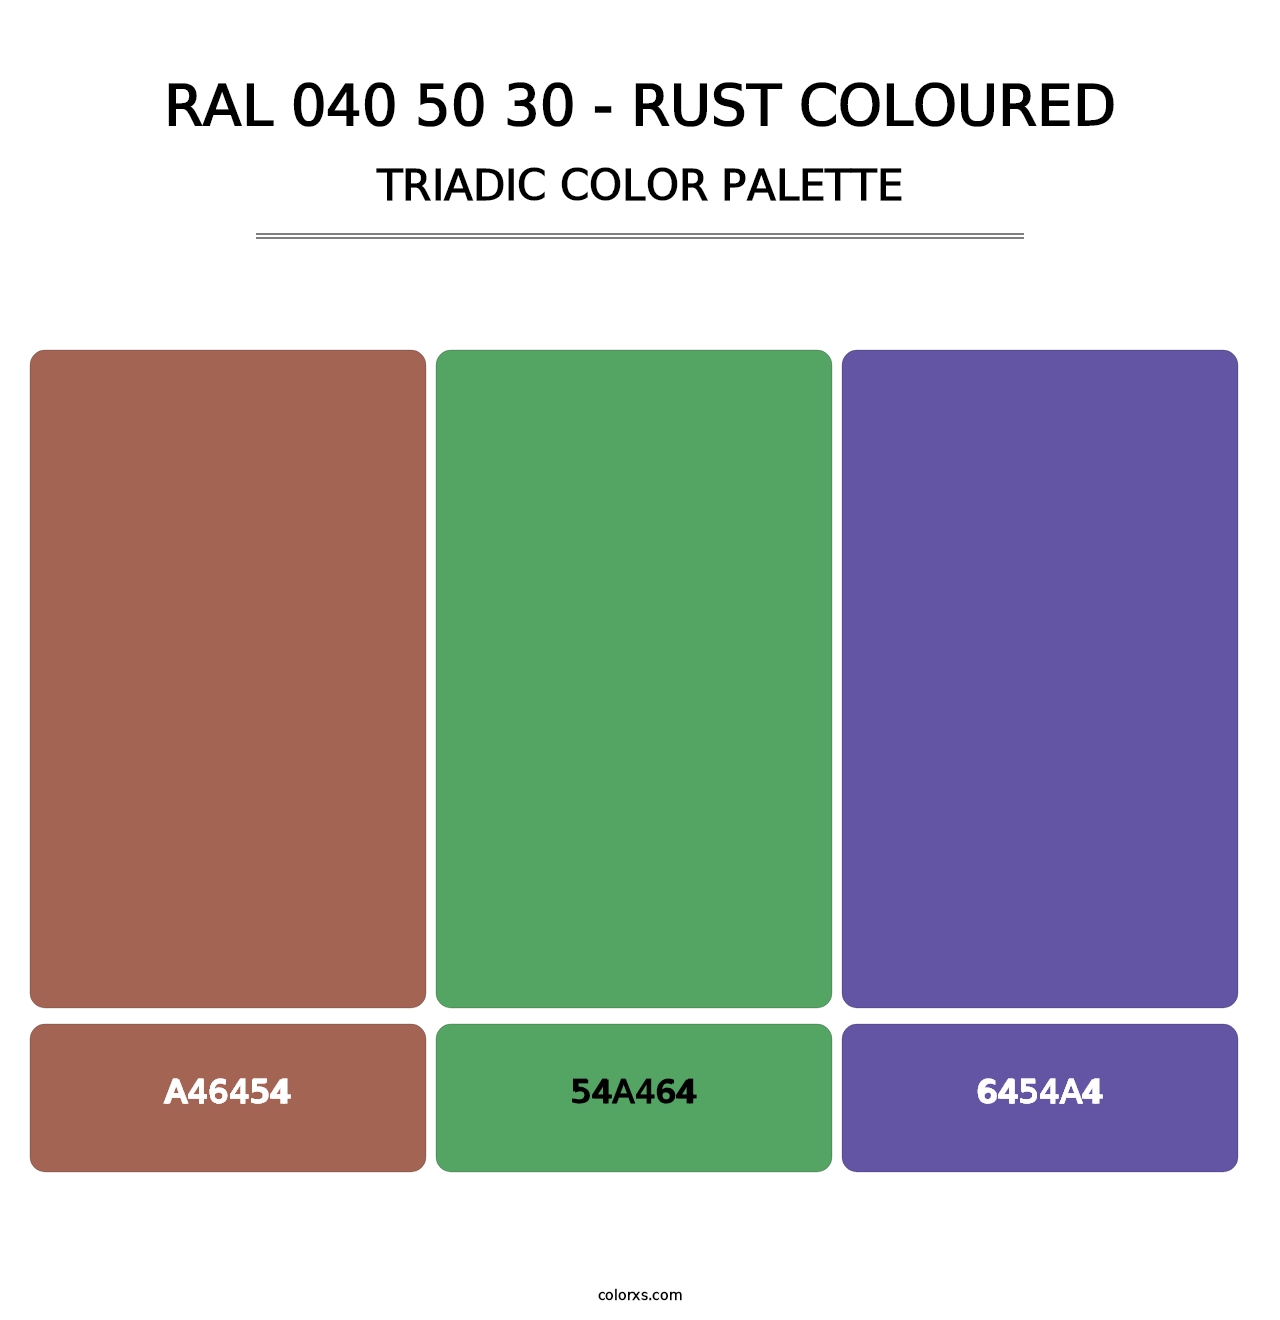 RAL 040 50 30 - Rust Coloured - Triadic Color Palette